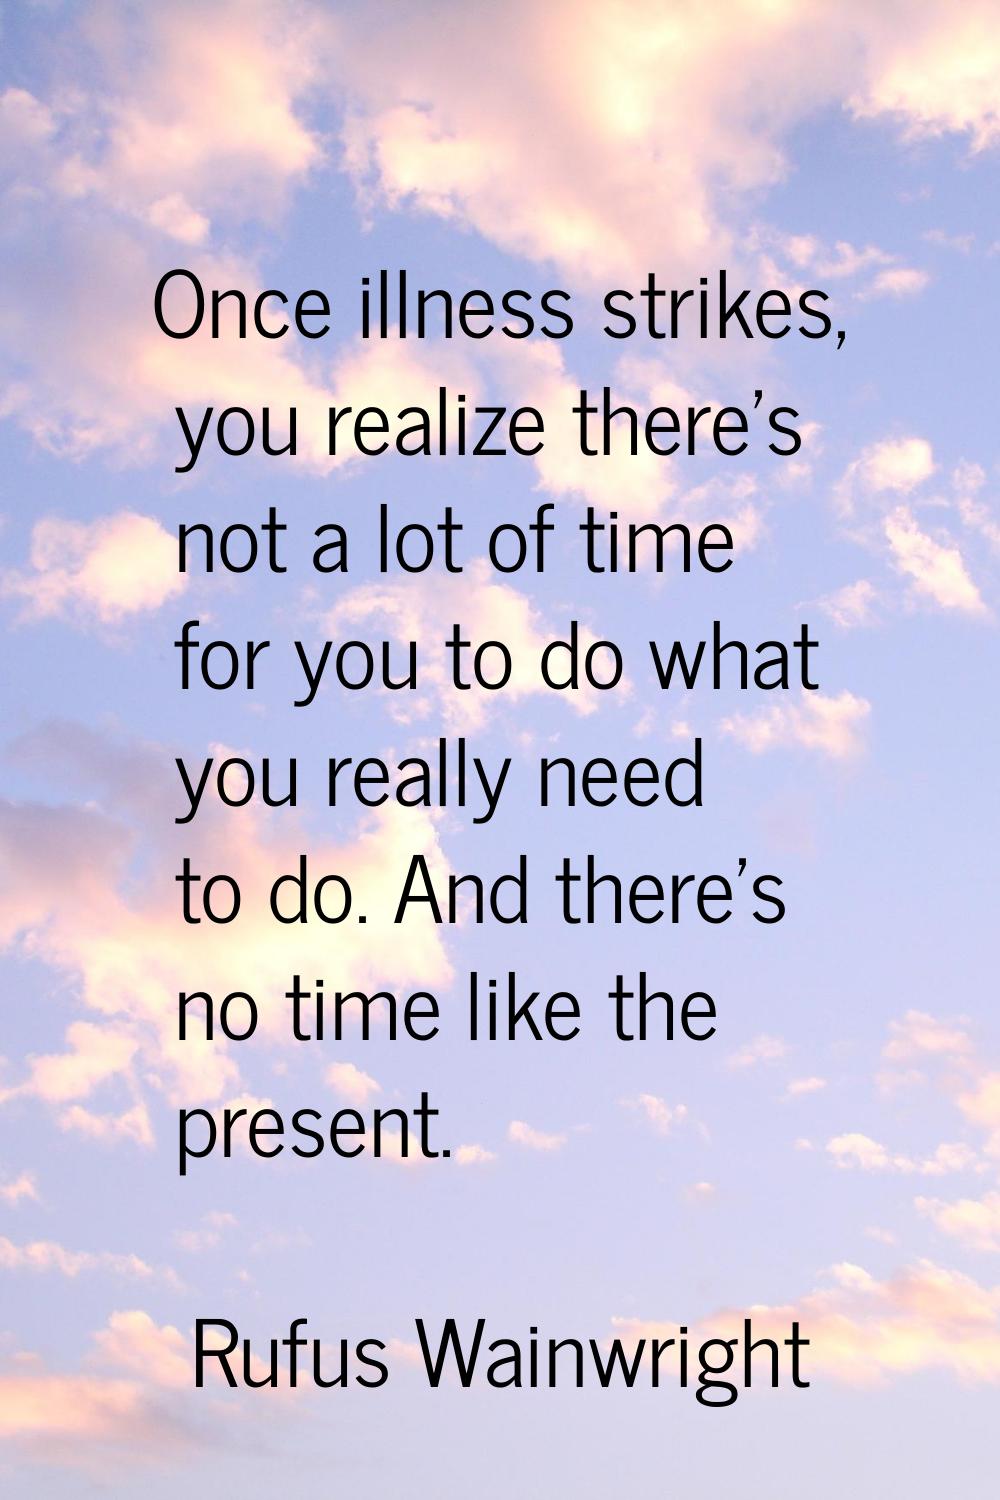 Once illness strikes, you realize there's not a lot of time for you to do what you really need to d